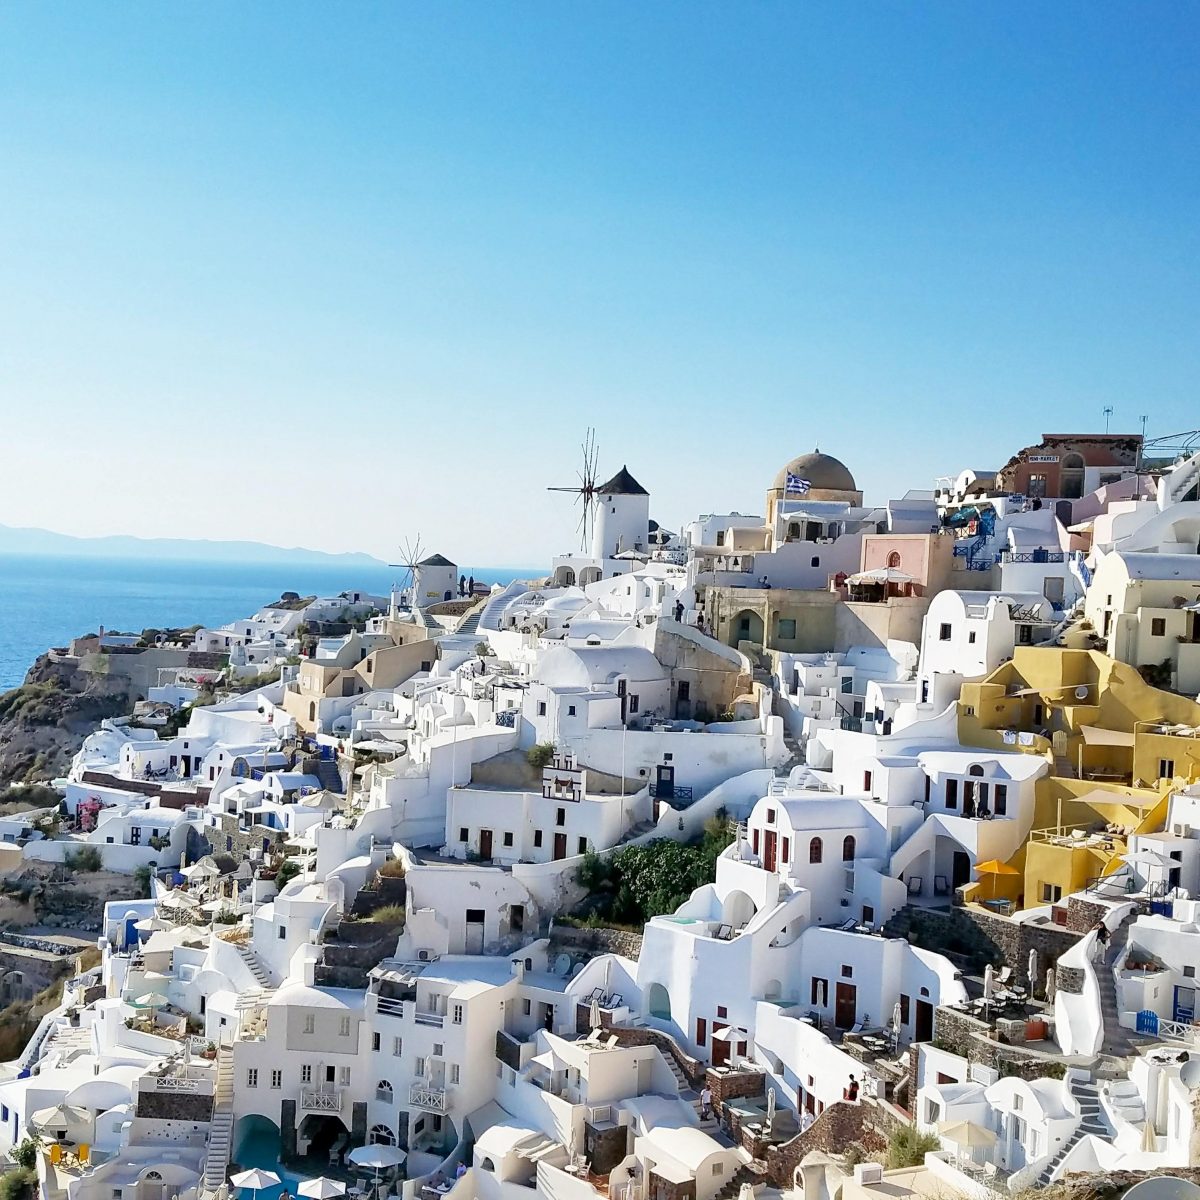 Santorini Travel Tips – Know Before You Go